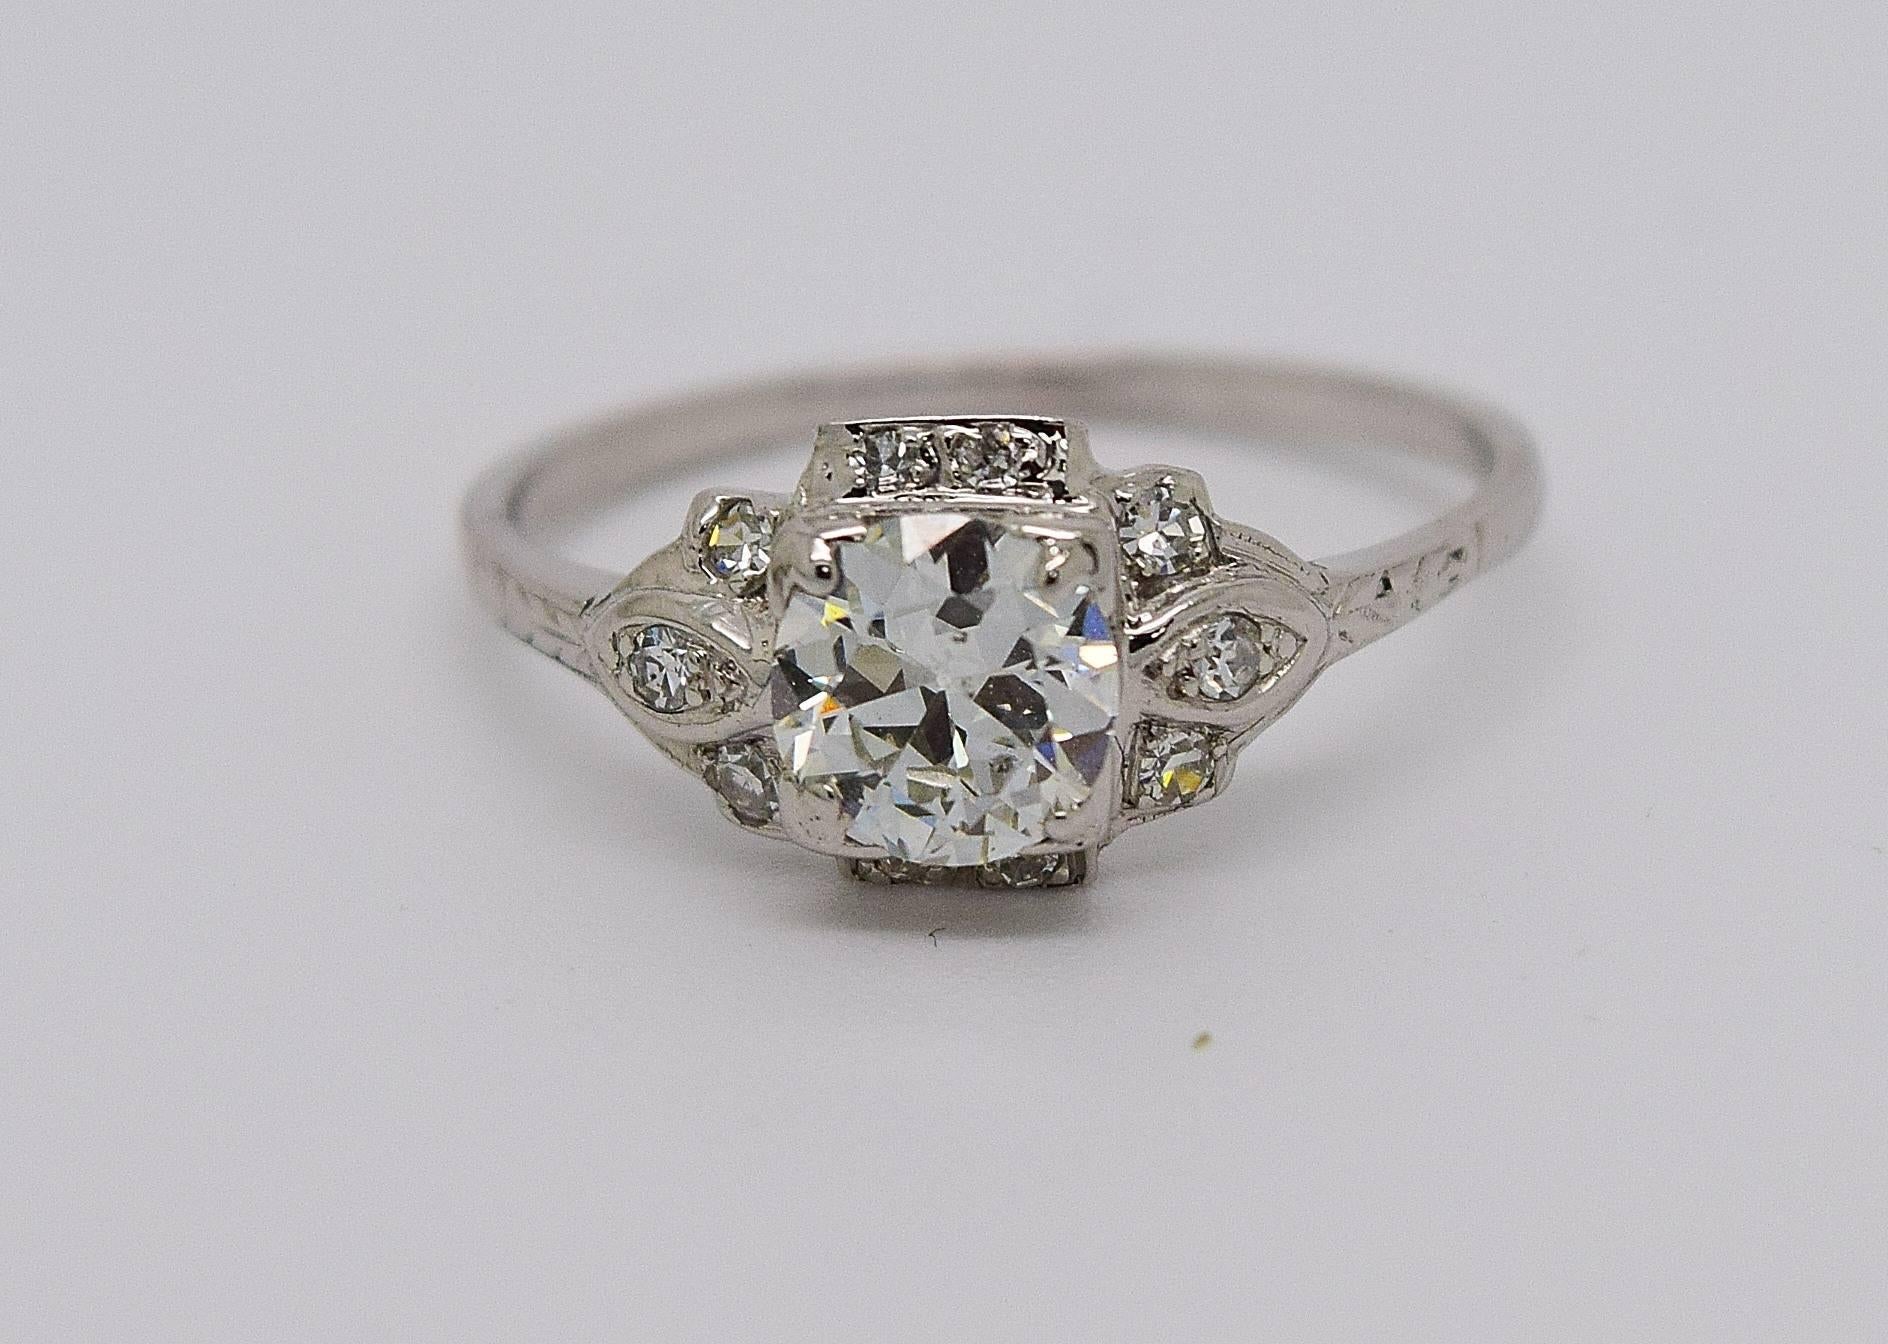 Beautiful Art Deco old European cut diamond engagement ring set in platinum. The center old European cut diamond is approximately 0.70 carats and is G-H in color and Si1 in clarity. The ring also contains 10 side old cut diamonds weighing